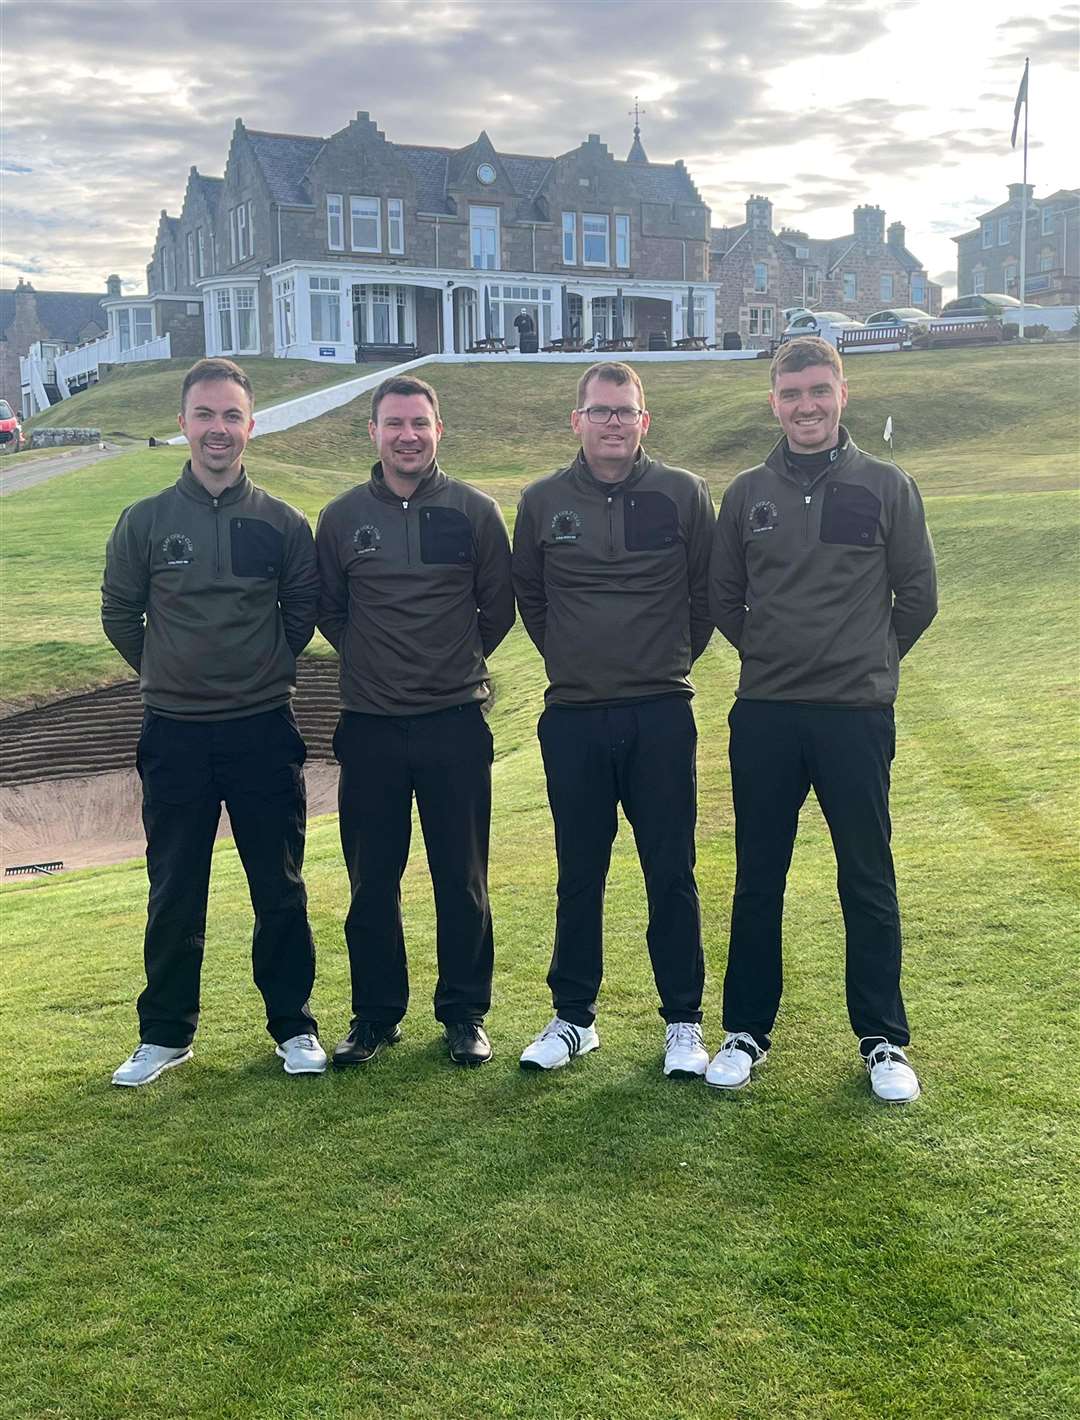 The Reay team who competed at the Northern Counties Championship at Moray Golf Club at the weekend – (from left) Gregor Munro, Michael Smith, Brent Munro and Tom Ross.